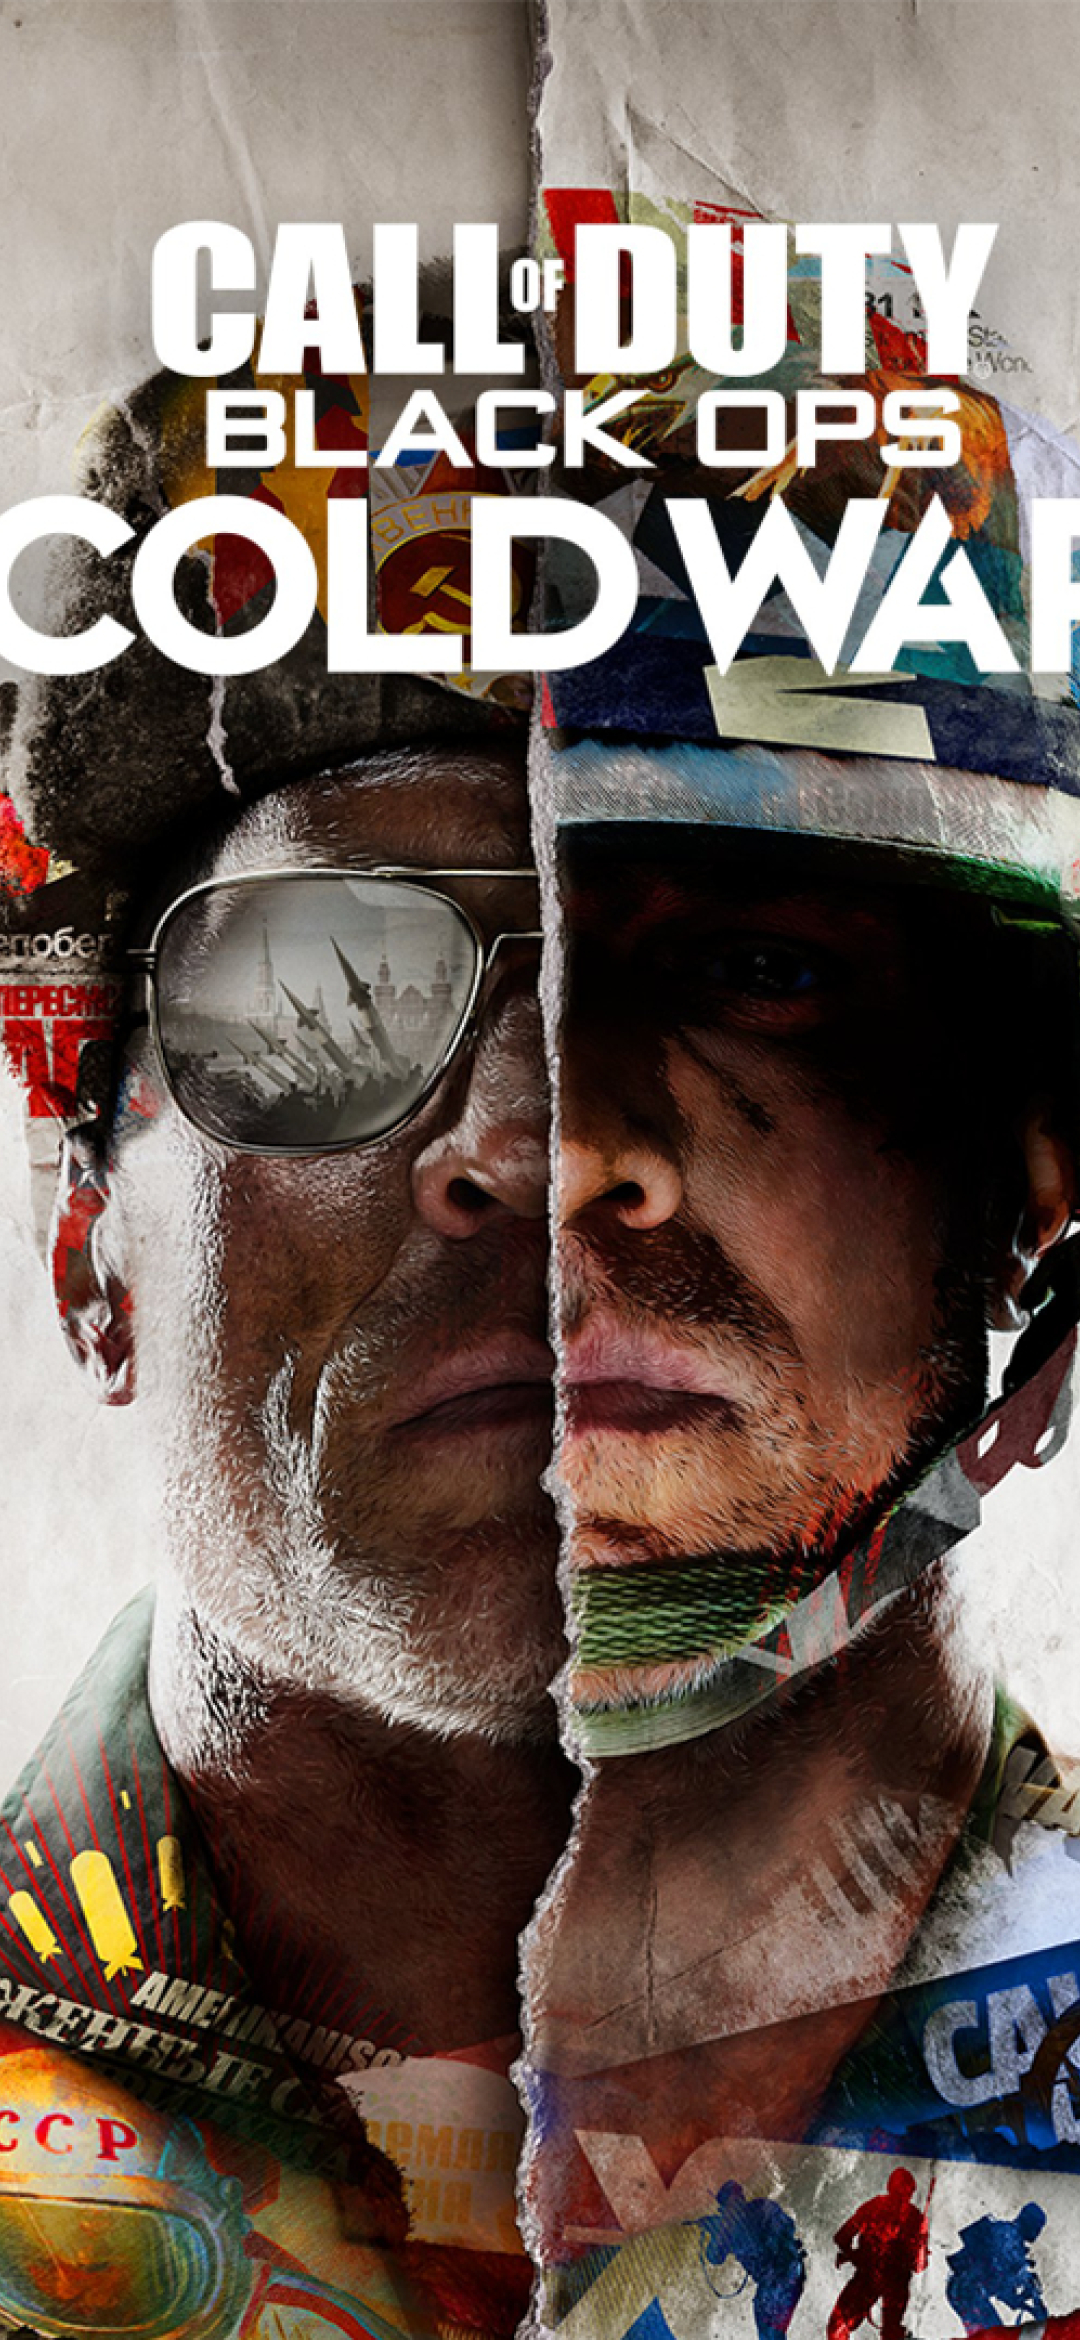 will call of duty cold war go on sale on black friday